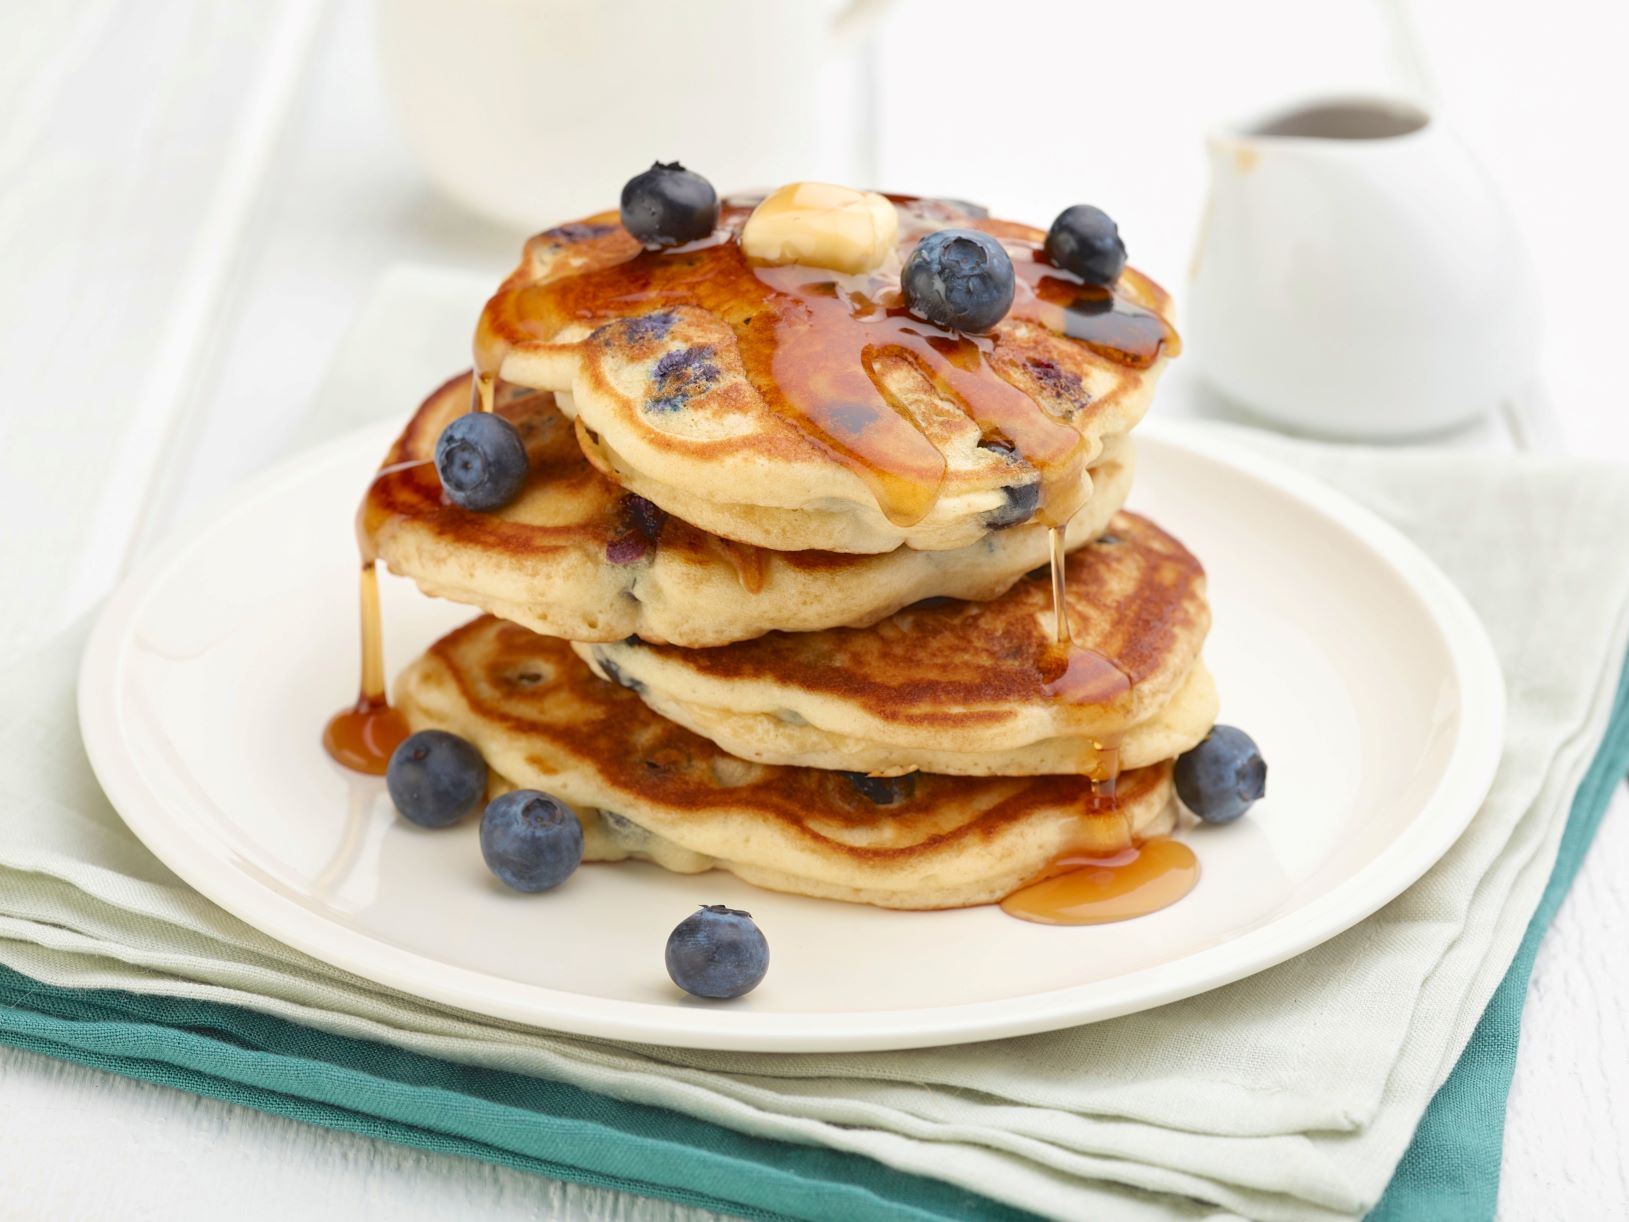 20-blueberry-pancakes-nutrition-facts